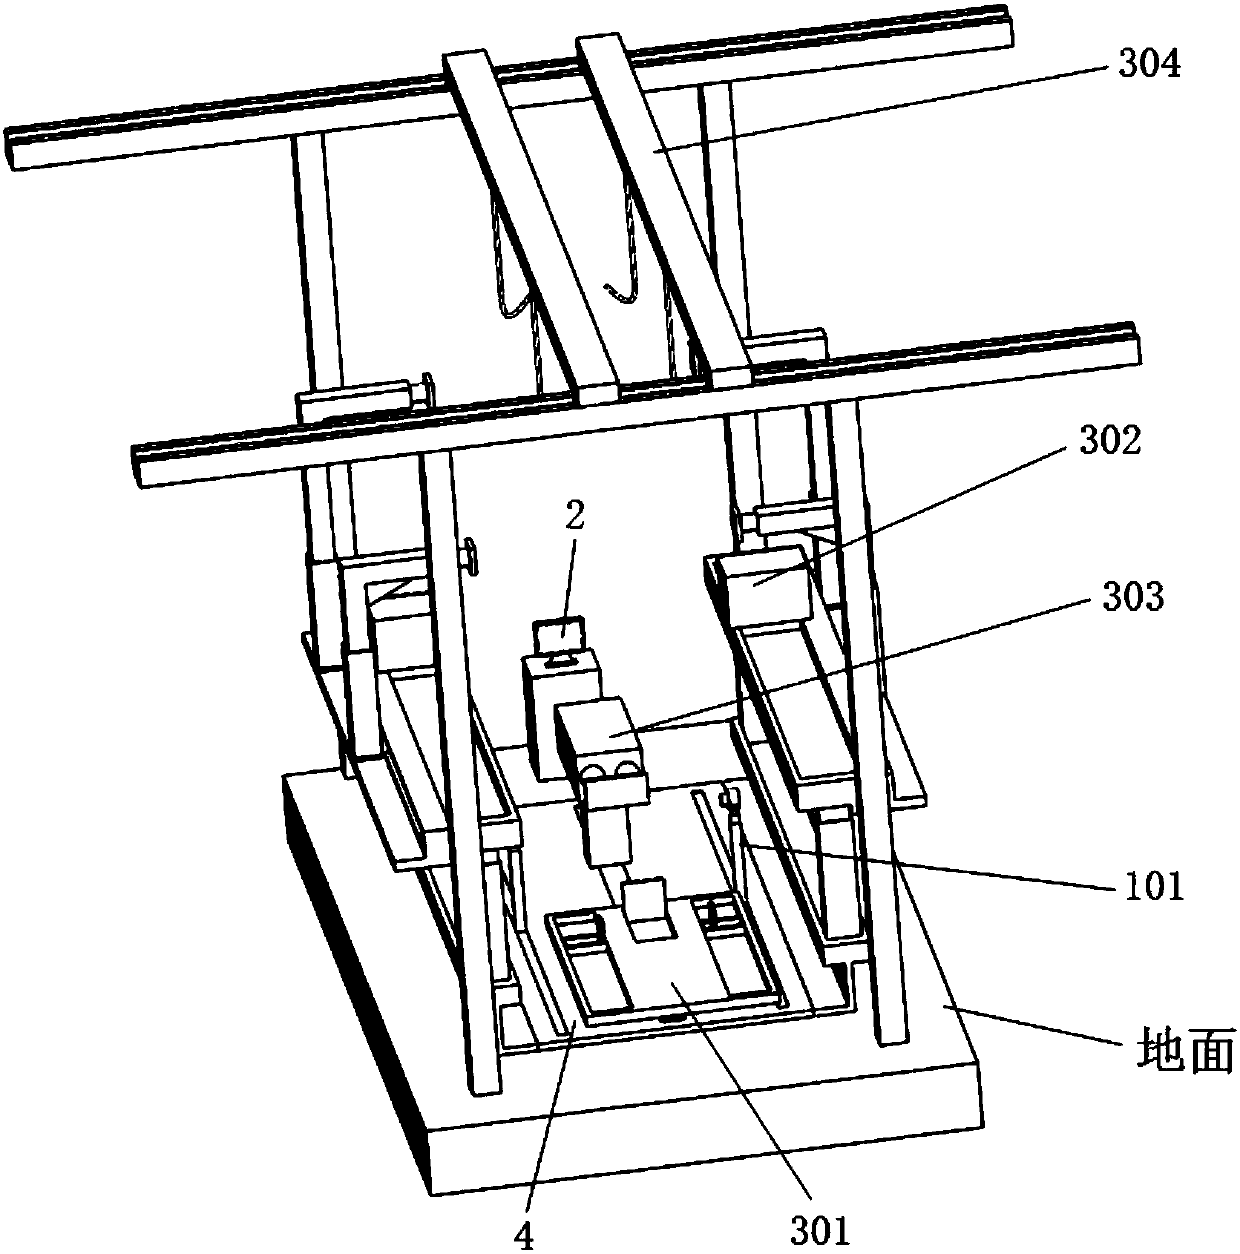 A working method for intelligent installation of heavy hydraulic supports